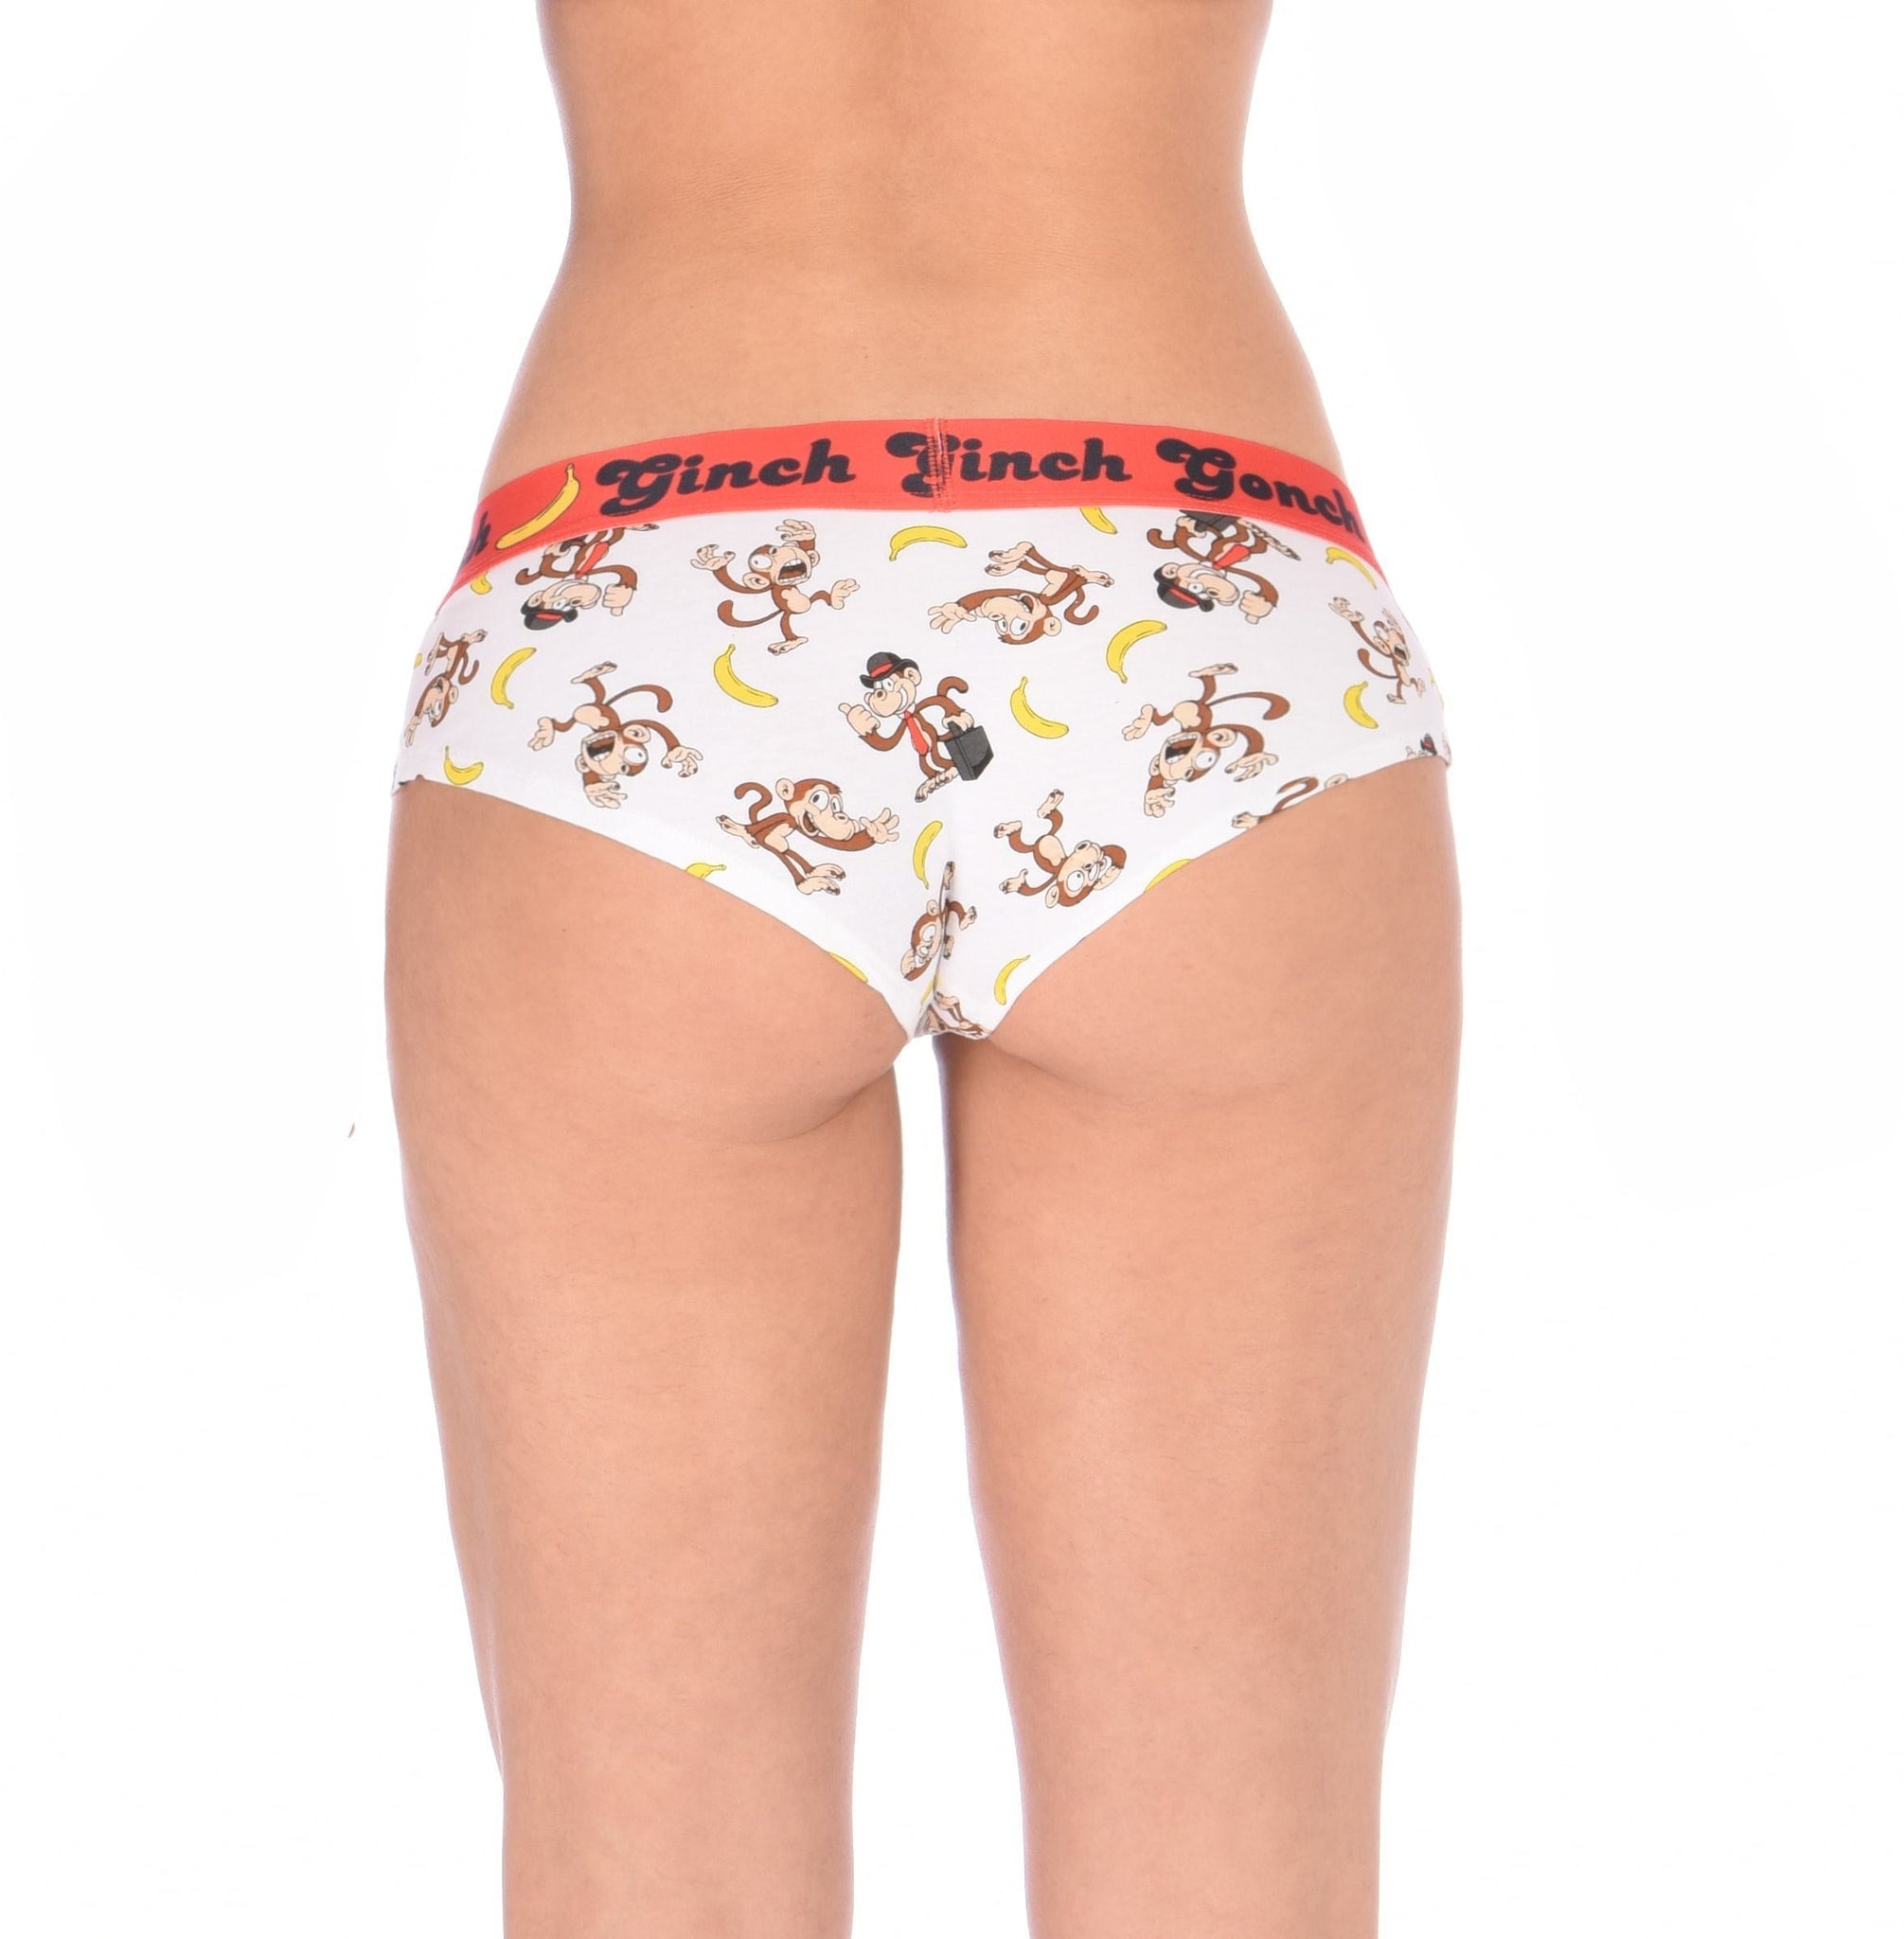 GG Ginch Gonch Gone Bananas cheeky gogo boy cut Brief women's underwear white fabric with monkeys and bananas red trim and red printed waistband back